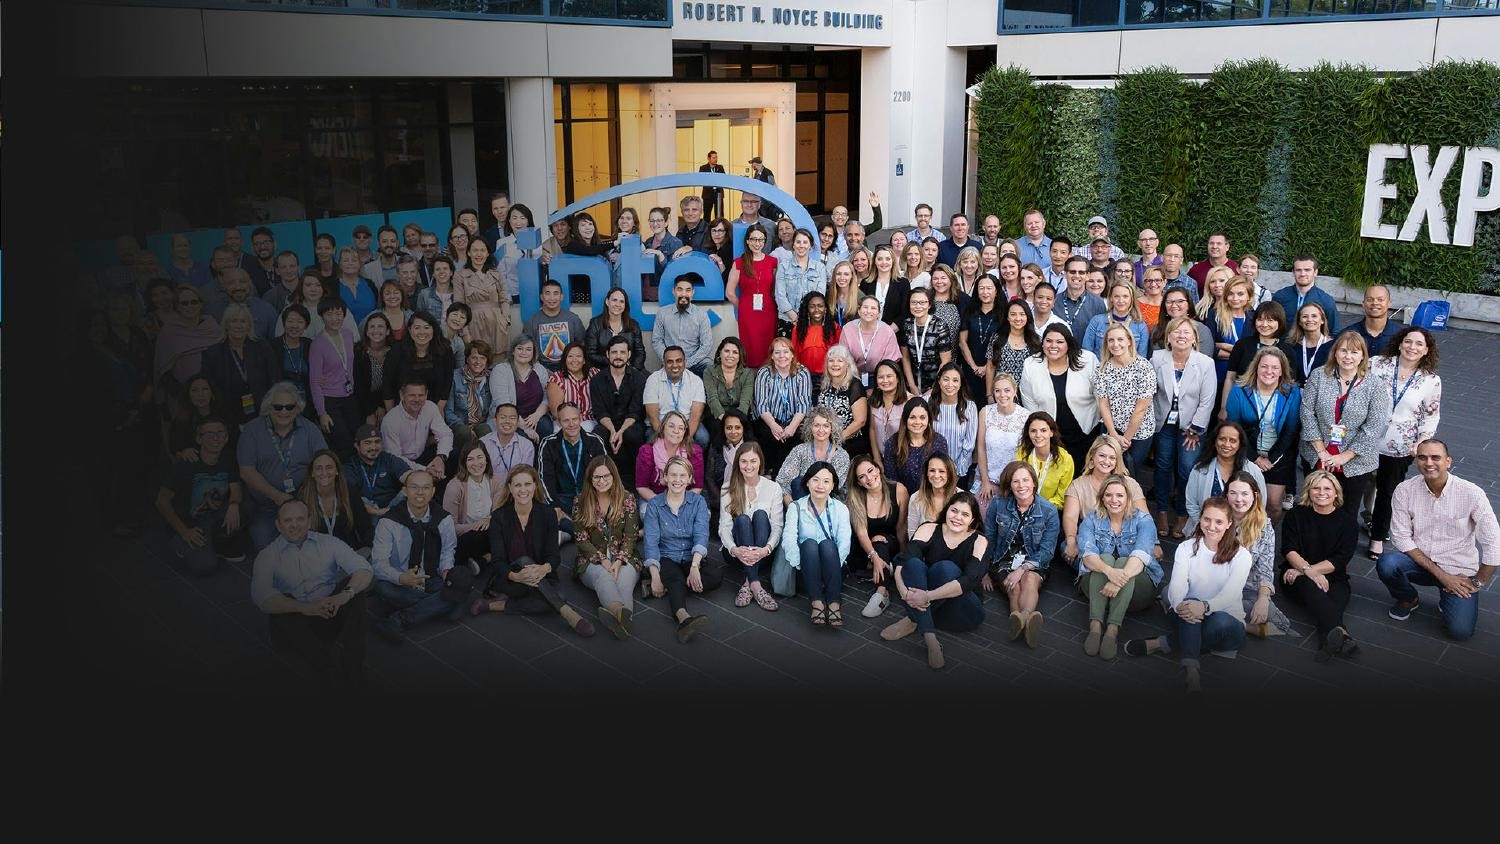 Group photo of Intel employees gathered in front of their office building.